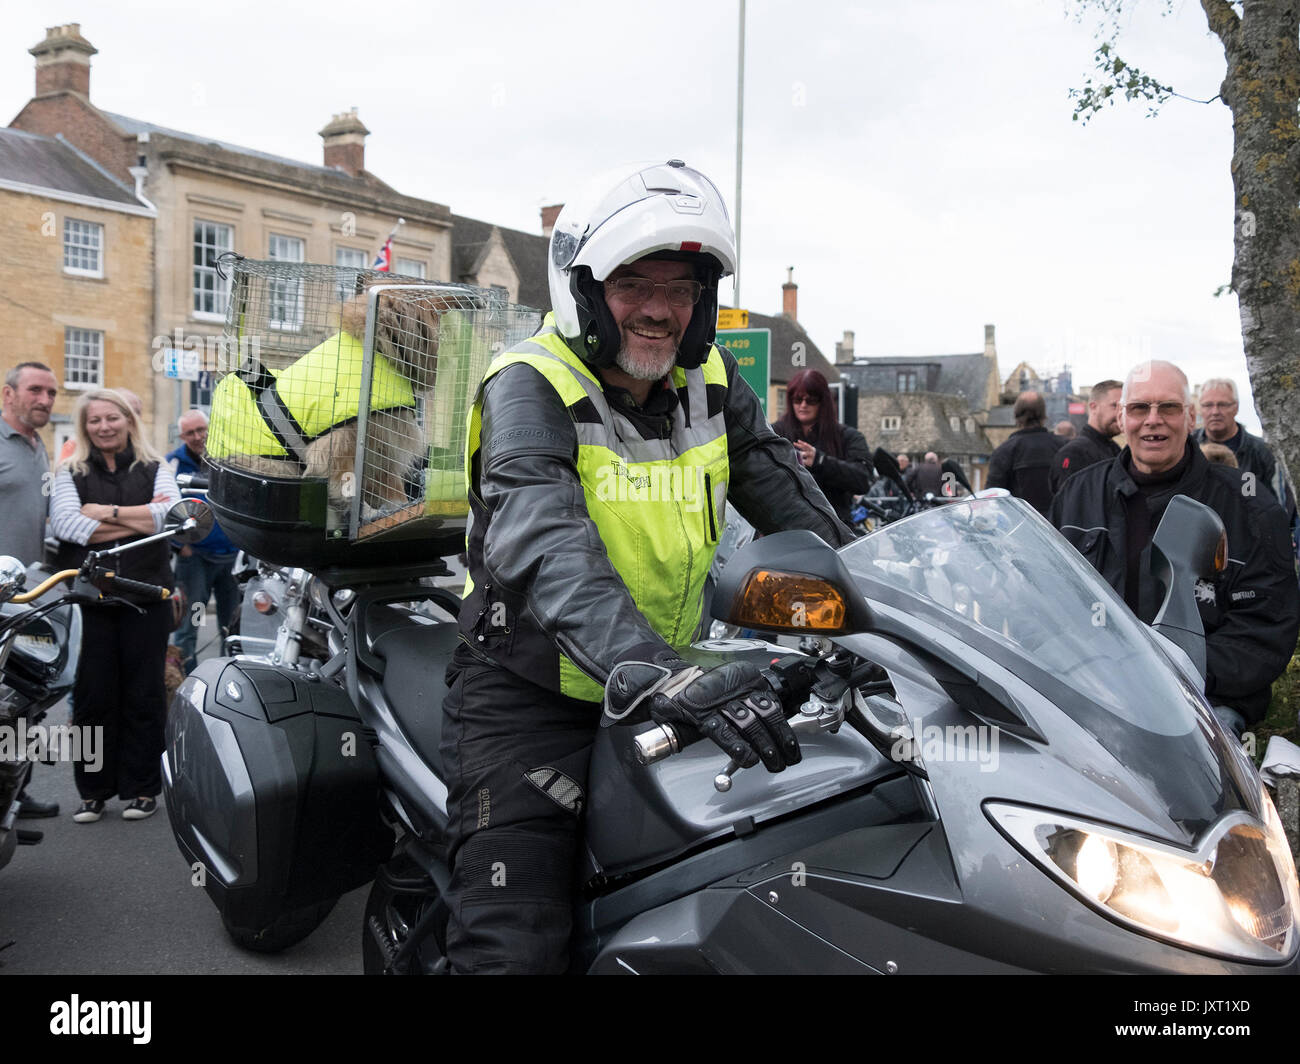 Moreton in Marsh, Gloucestershire, UK. 16th Aug, 2017. Biker and dog ready for the Cotswold Bike Nite, a charity fund raising event held every week in the Cotswolds, Biker with Honey the Sheltie dog riding pillion, Credit: Graham Light/Alamy Live News Stock Photo